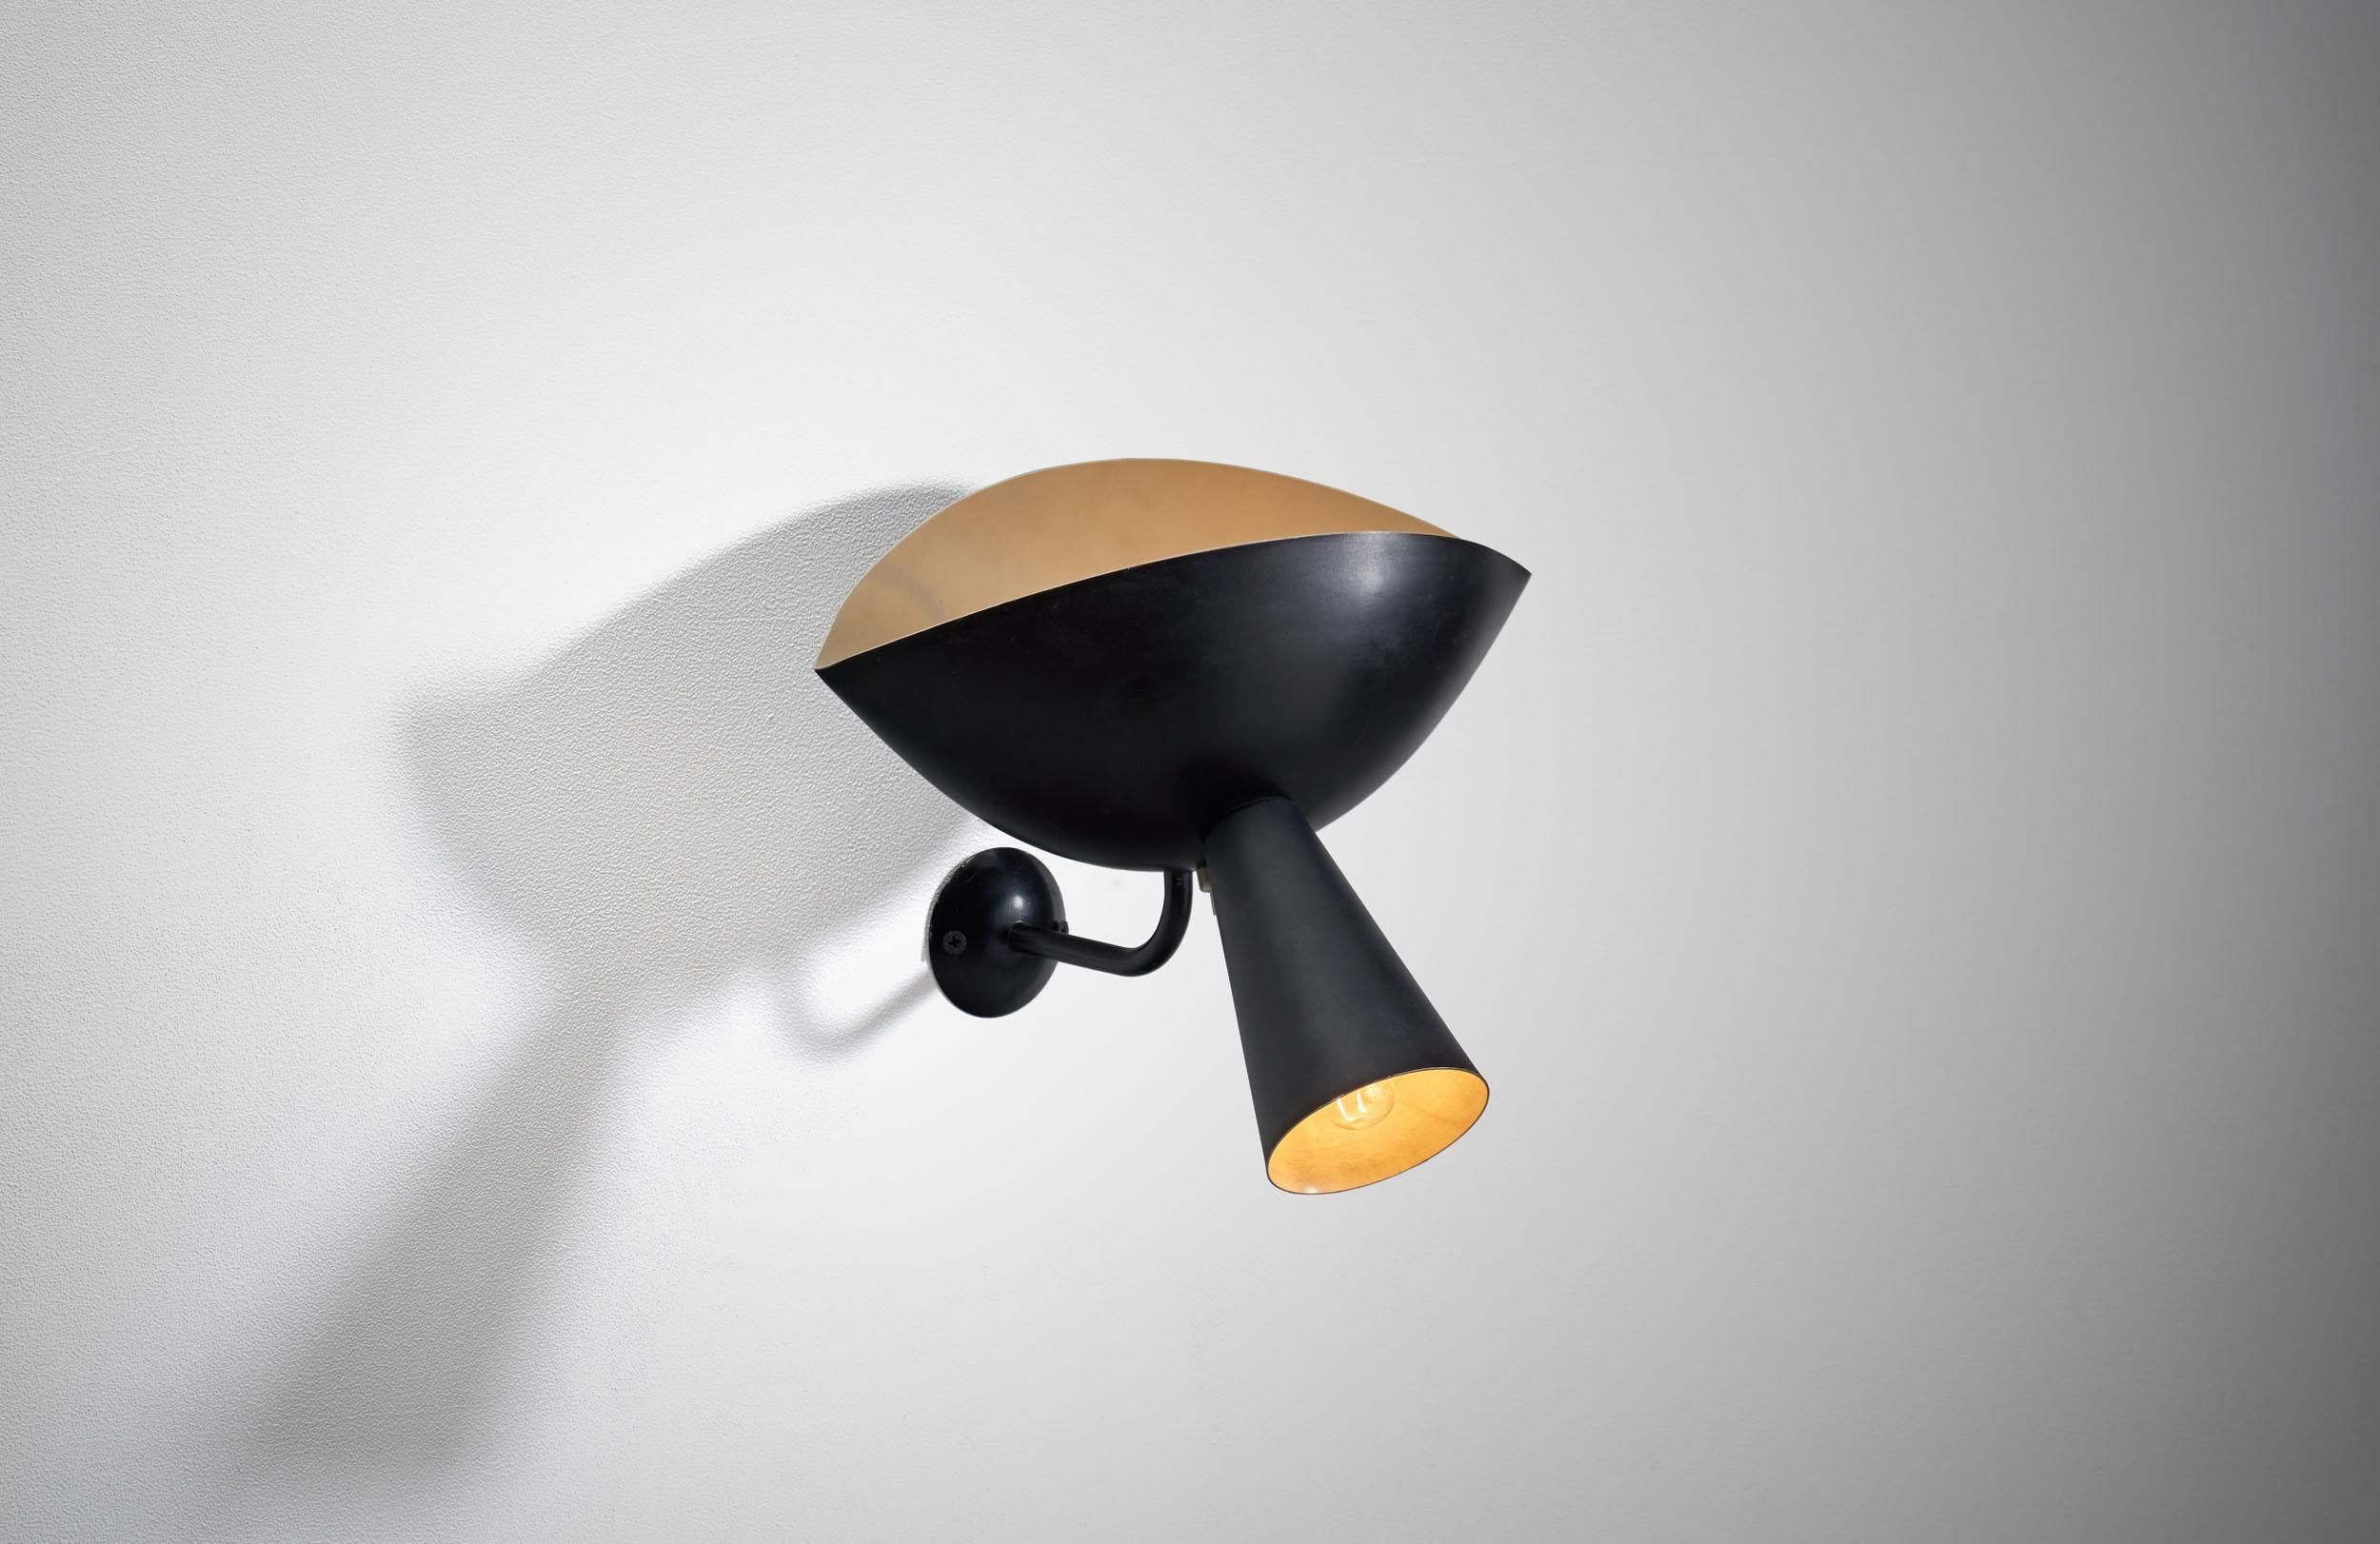 This lamp is an original from the 1950s and not one of the many later reproductions. The Cachan wall sconce comprises both an upper sphere, which casts an ambient glow, and a cone-shaped task light. One 